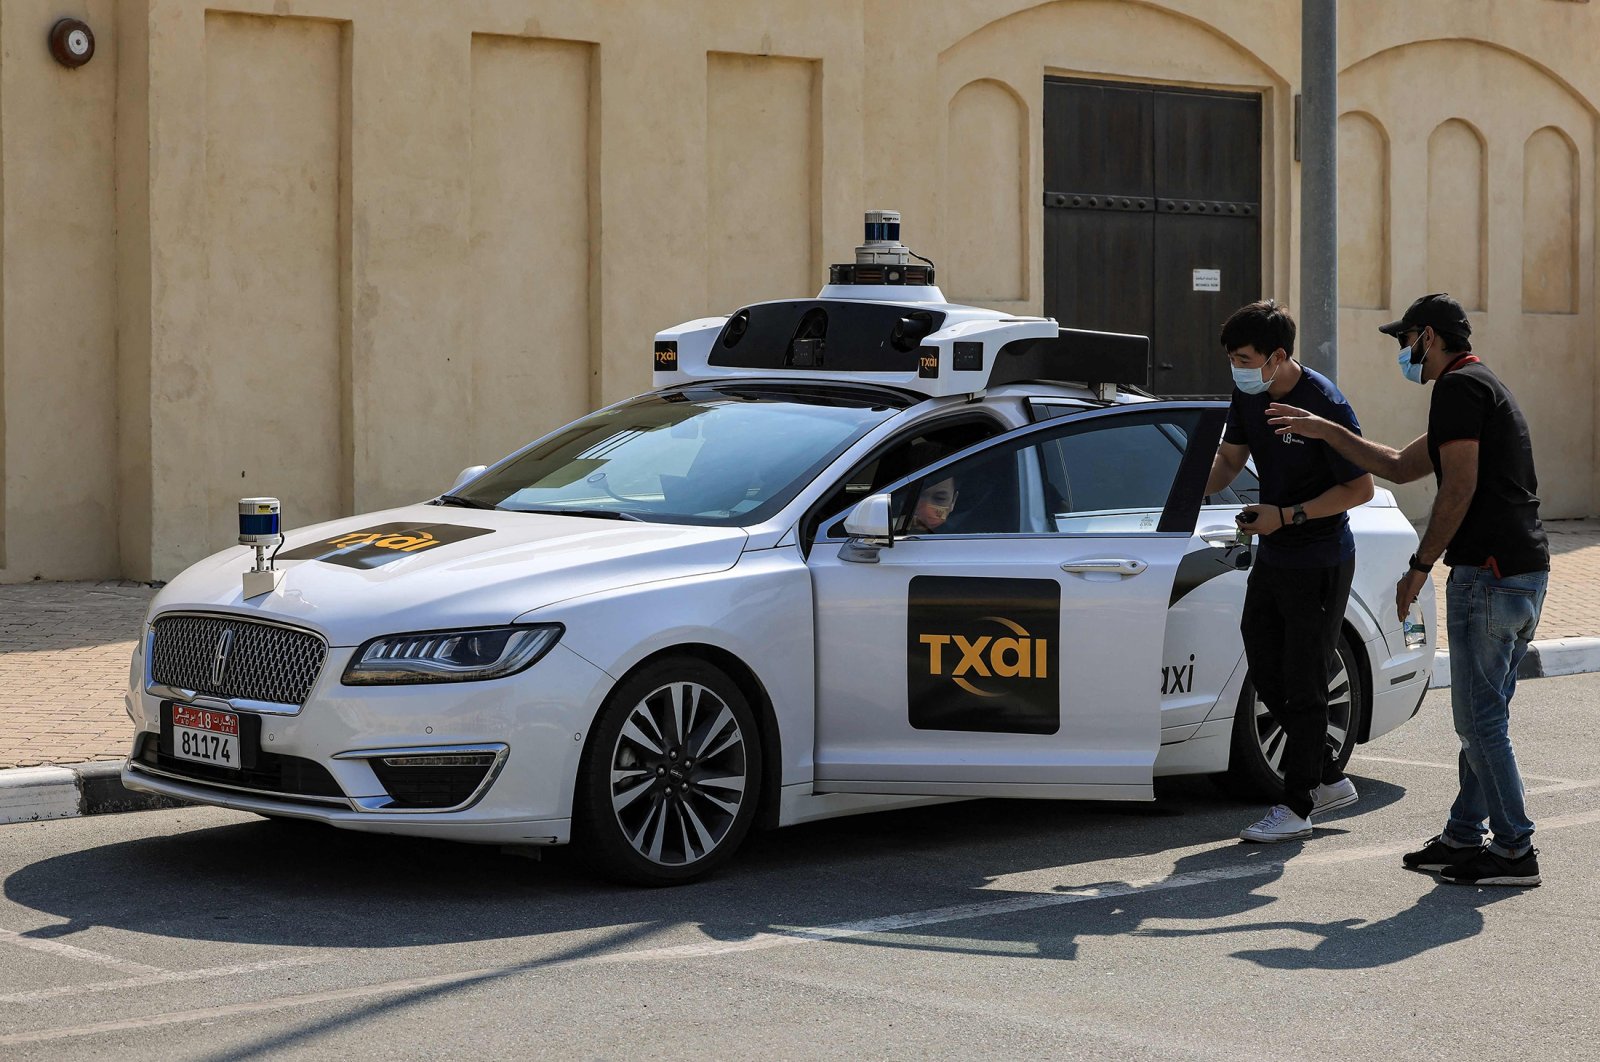 Passengers enter one of the self-driving taxis being used in a tech demonstration to transport passengers to the nearby Yas Island, in the capital Abu Dhabi, United Arab Emirates, Nov. 30, 2021. (AFP Photo)